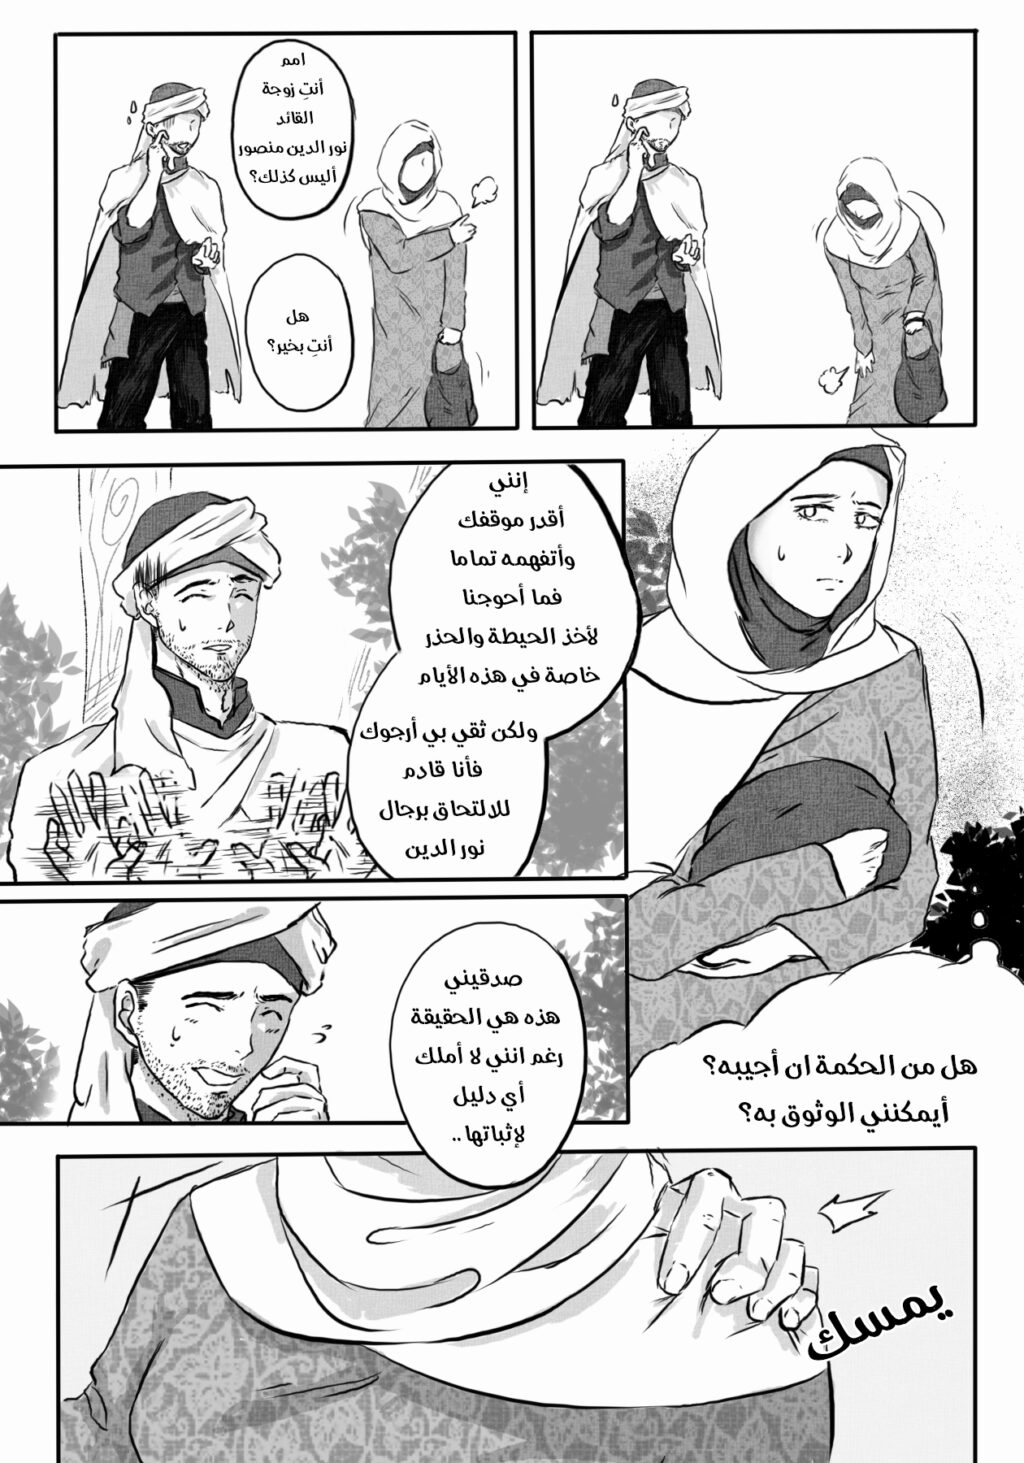 PAGE 12